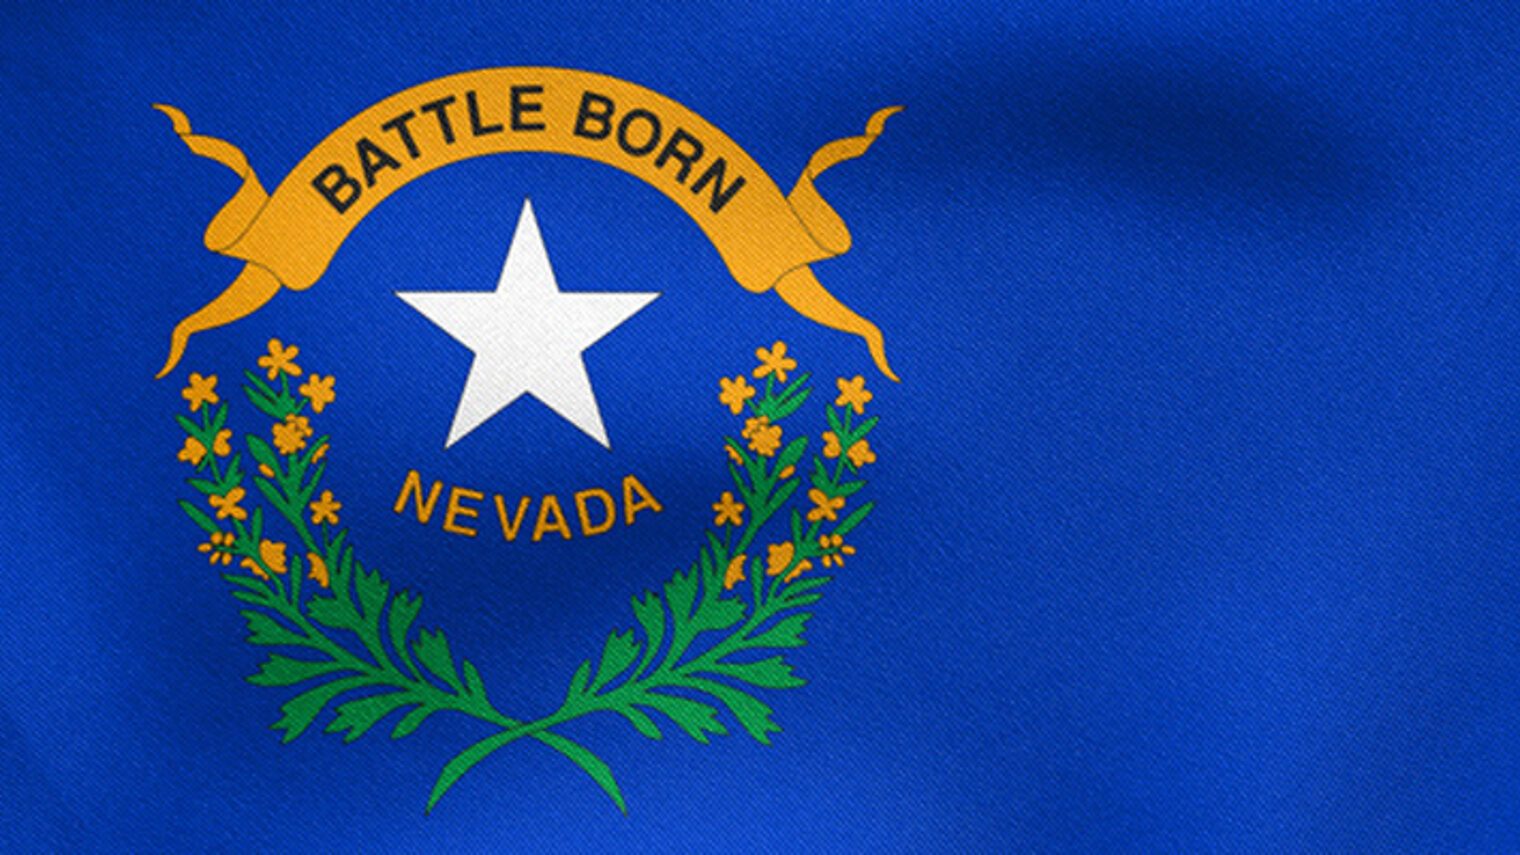 Flag of the US state of Nevada. American patriotic element. USA banner. United States of America symbol. Nevadan official flag waving in the wind, real detailed fabric texture. 3D illustration Schlagwort(e): flag, nevada, nevadan, usa, america, american, united, state, us, fabric, texture, wavy, wind, flying, flowing, fluttering, blowing, ripple, textile, silk, national, official, banner, ensign, pennant, country, symbol, 3D, illustration, emblem, patriotism, nation, sign, icon, insignia, silky, cotton, tourism, travel, textured, image, picture, holiday, correct, accurate, size, dimension, proportion, independence, celebration